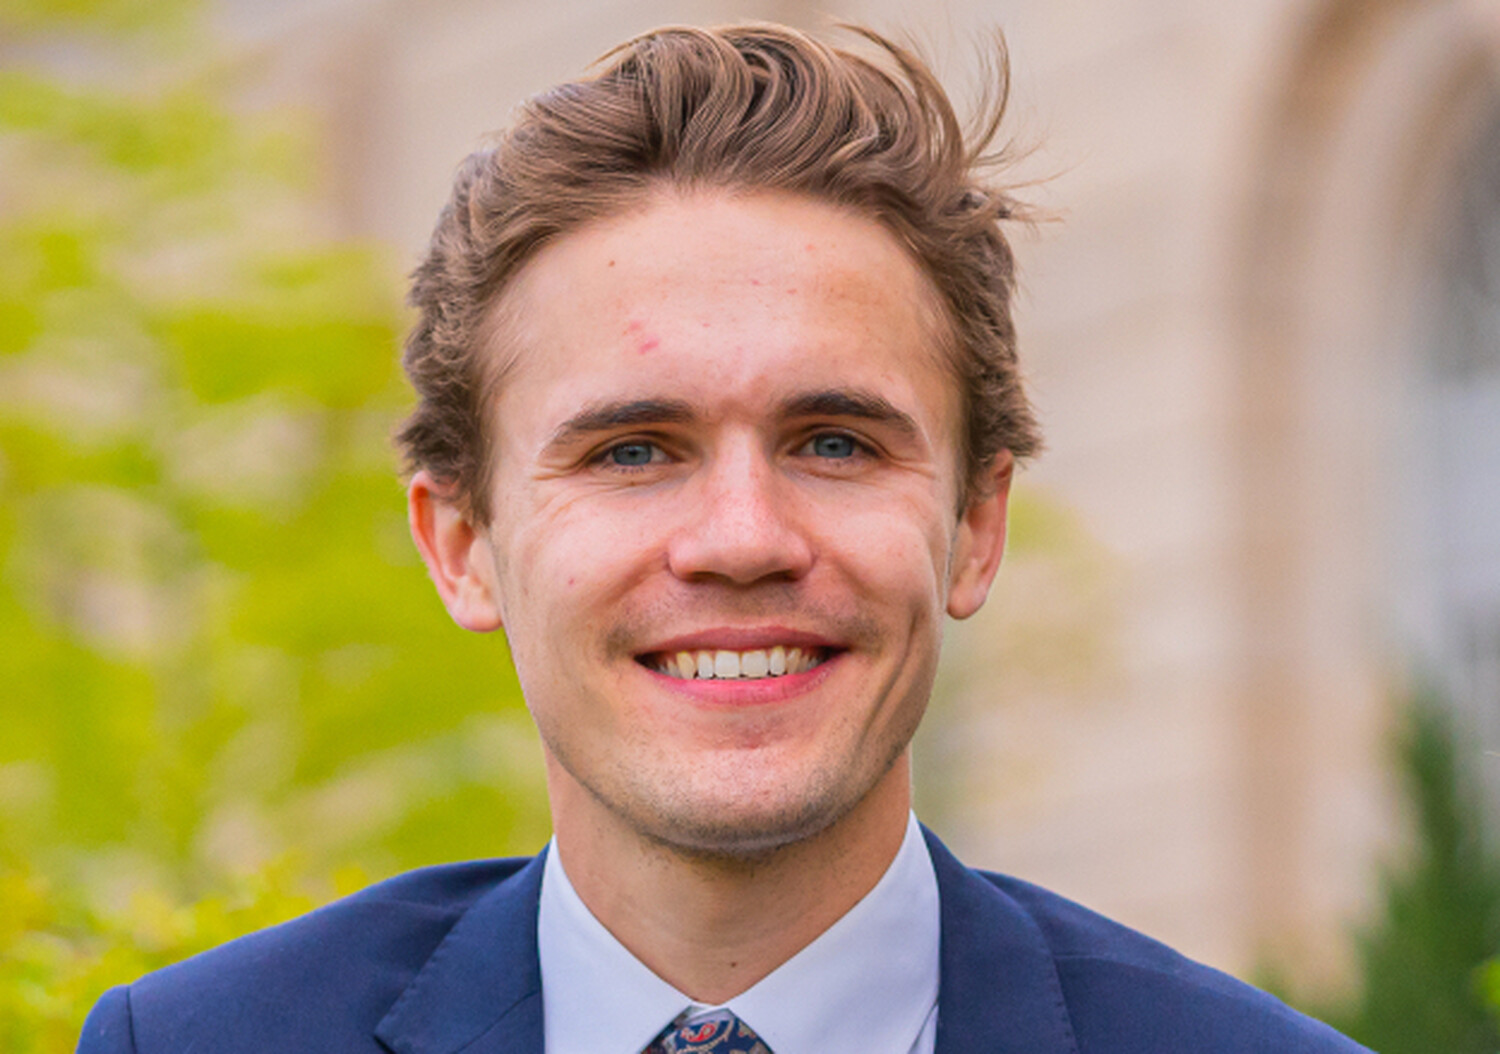 1L Evan Dale: Spent Two Years on Capitol Hill Working for the House of Representatives